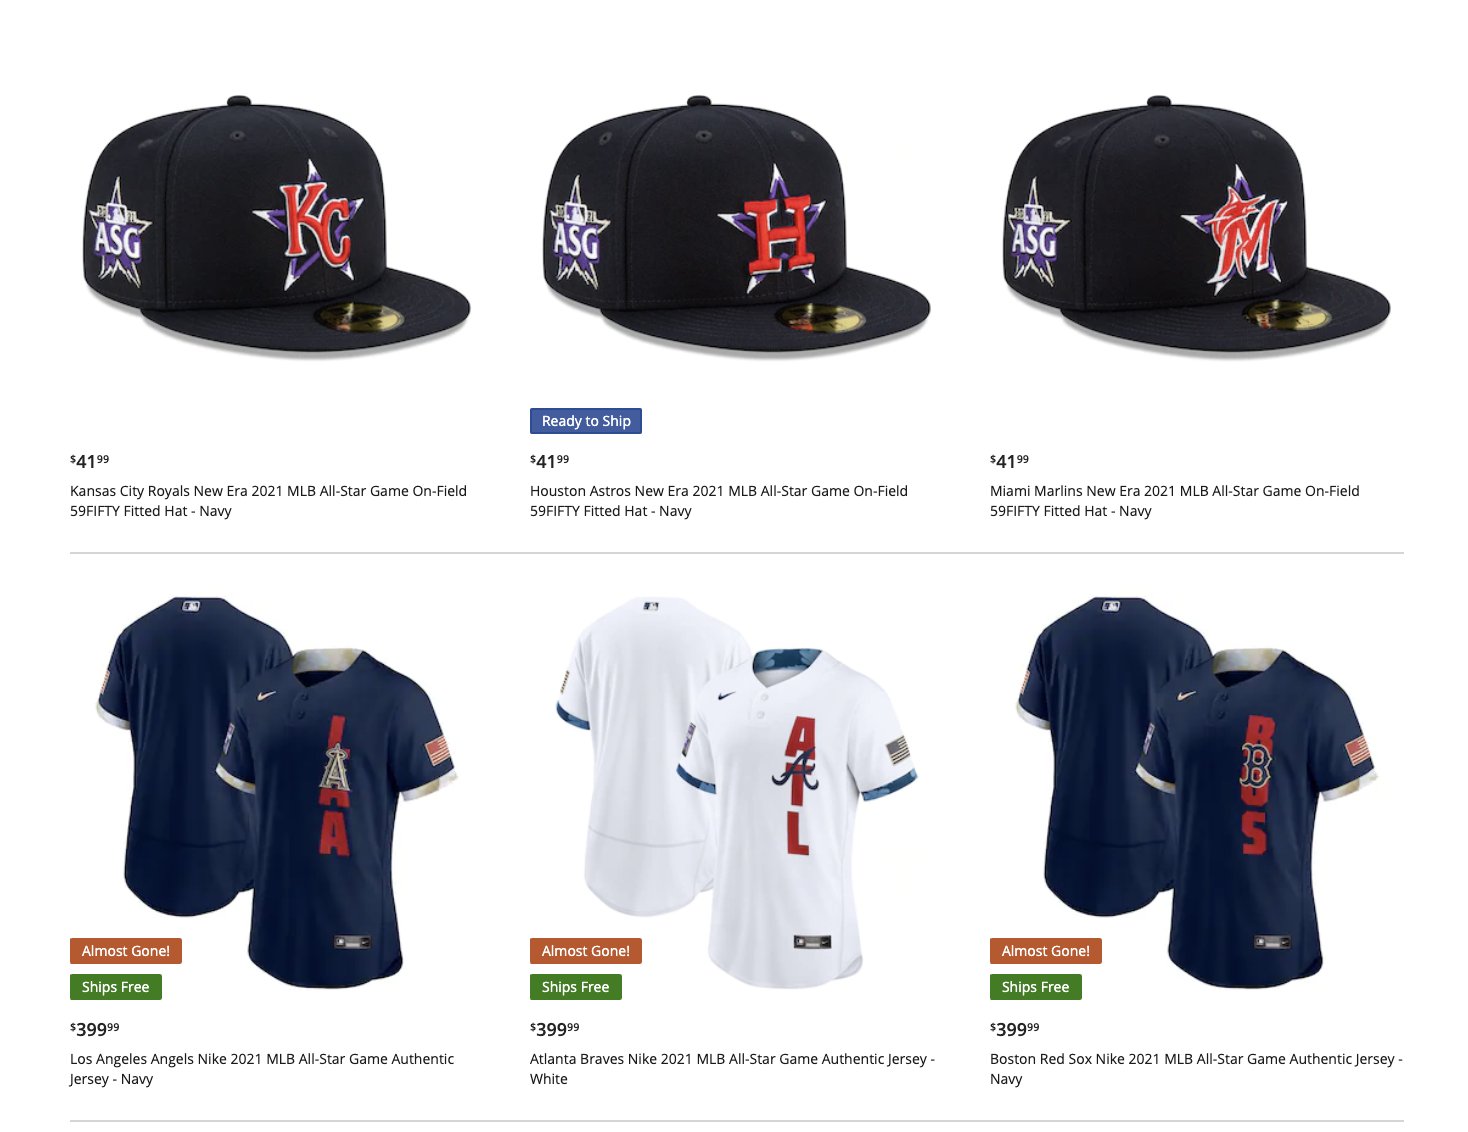 MLB debuts 2021 All-Star Game uniforms and caps